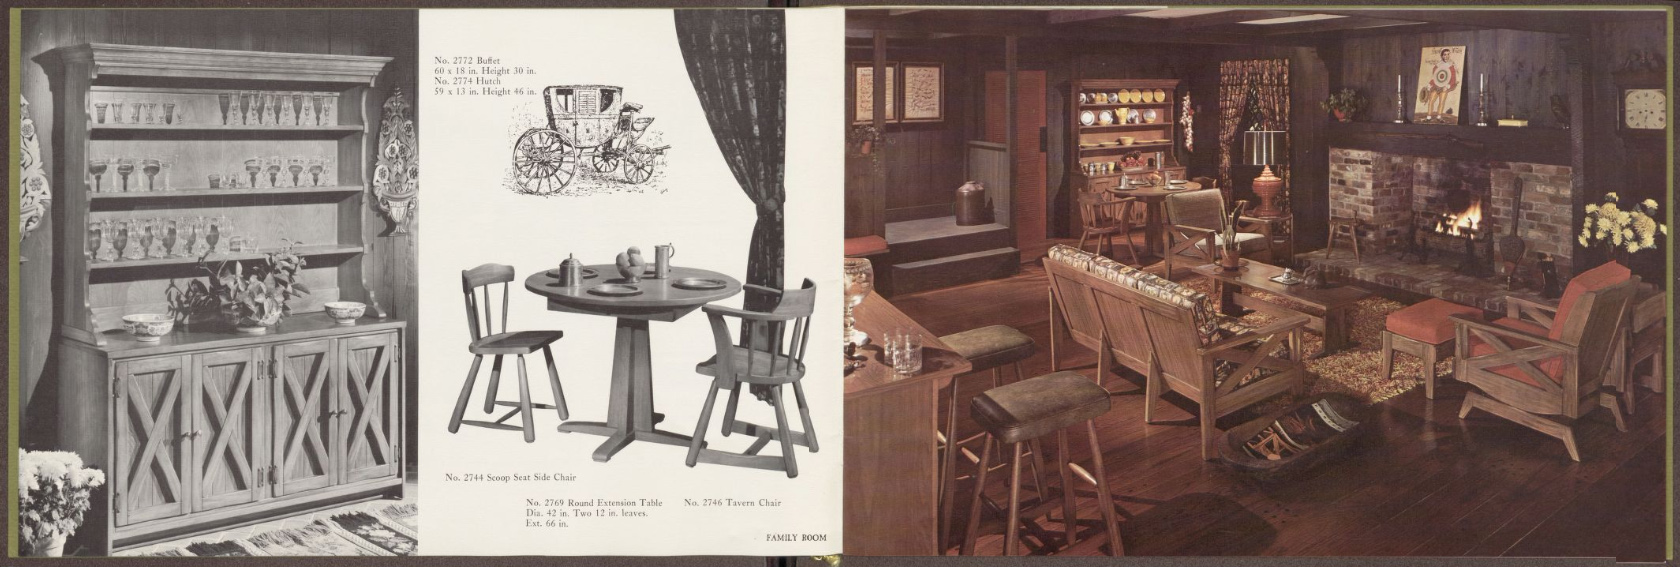 The Williams Collection includes many full-color catalogs that document the high-quality furniture the company produced as well as its ingenuity in marketing.